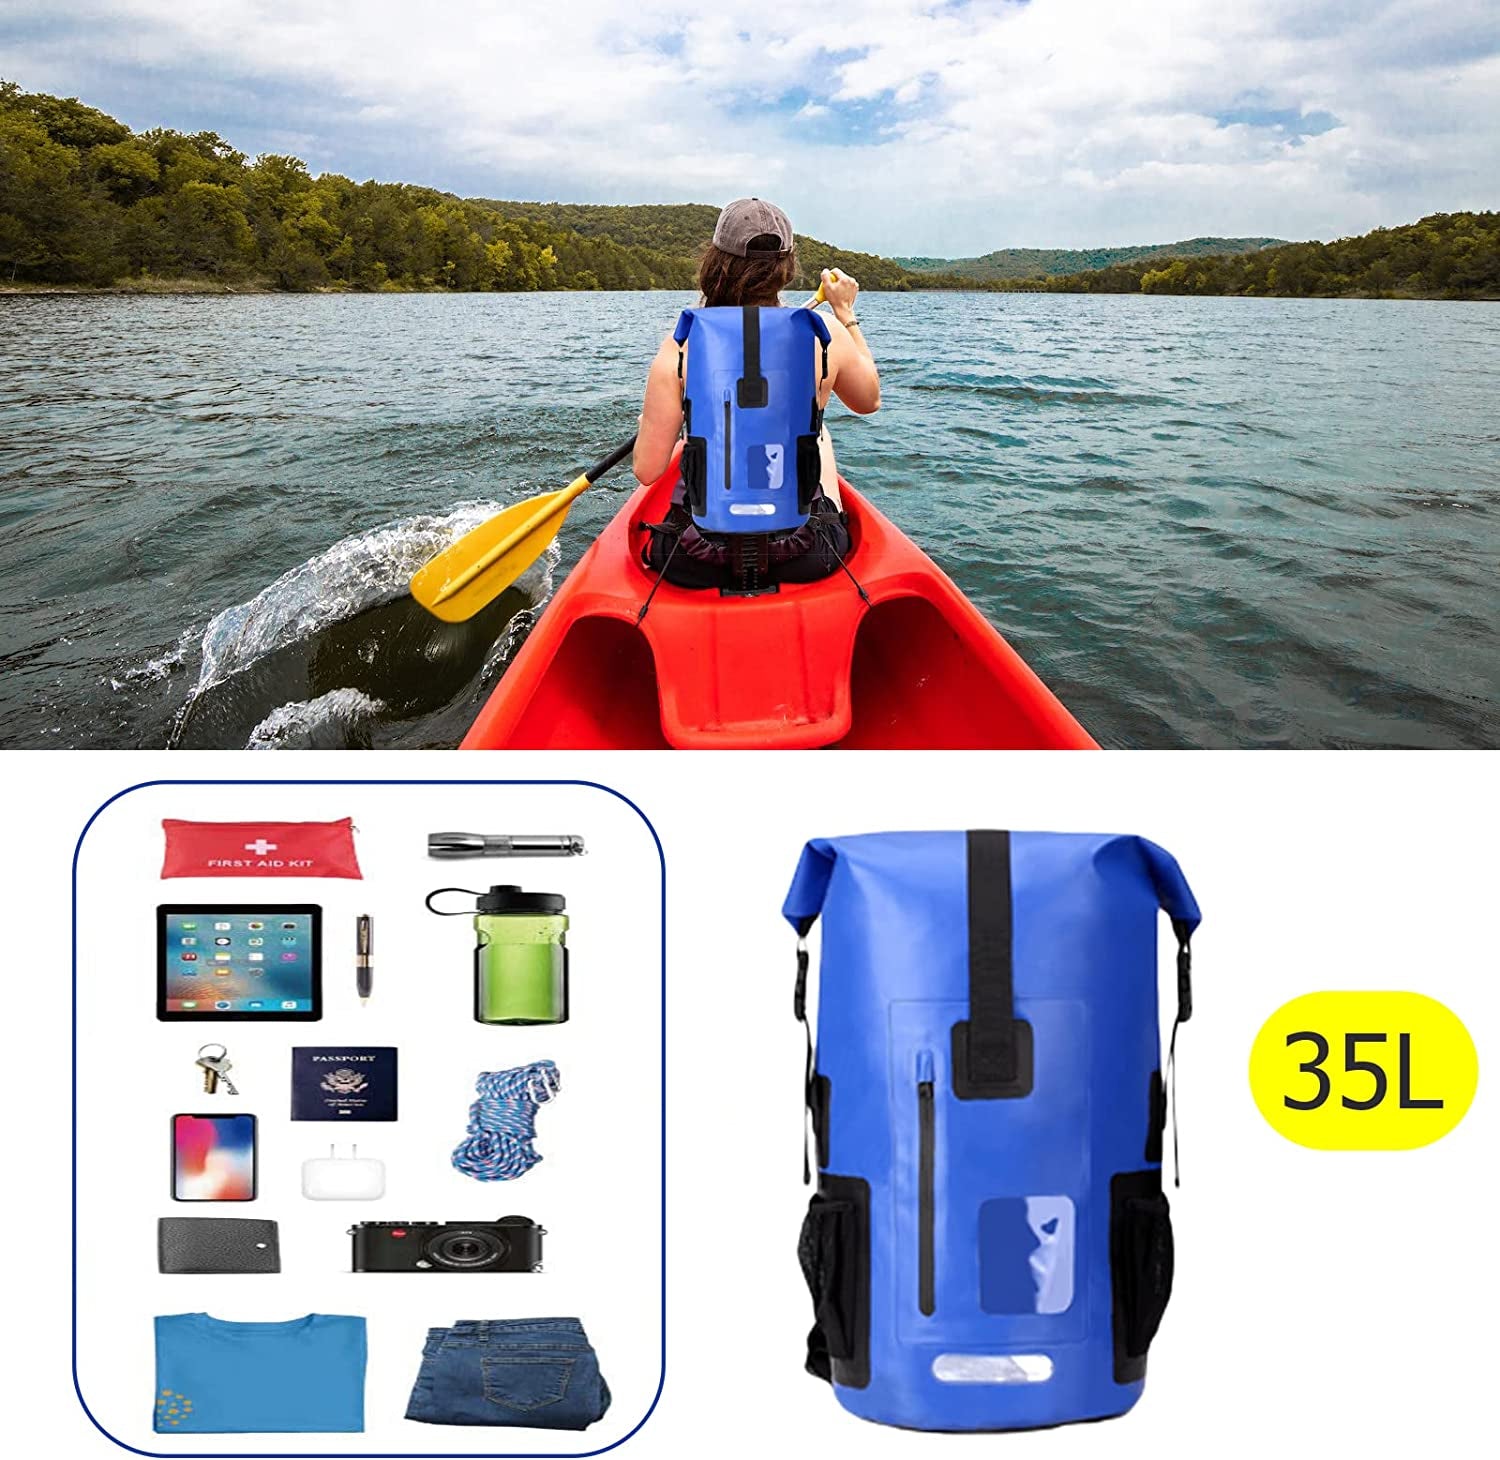 LEWEREST Dry Bag Backpack Waterproof 35L, Heavy Duty Dry Bags for Kayaking Waterproof with Roll-Top Closure, Front & Side Pocket and Soft Padded Backpack Straps, Dry Sack for Boating Sailing Canoeing